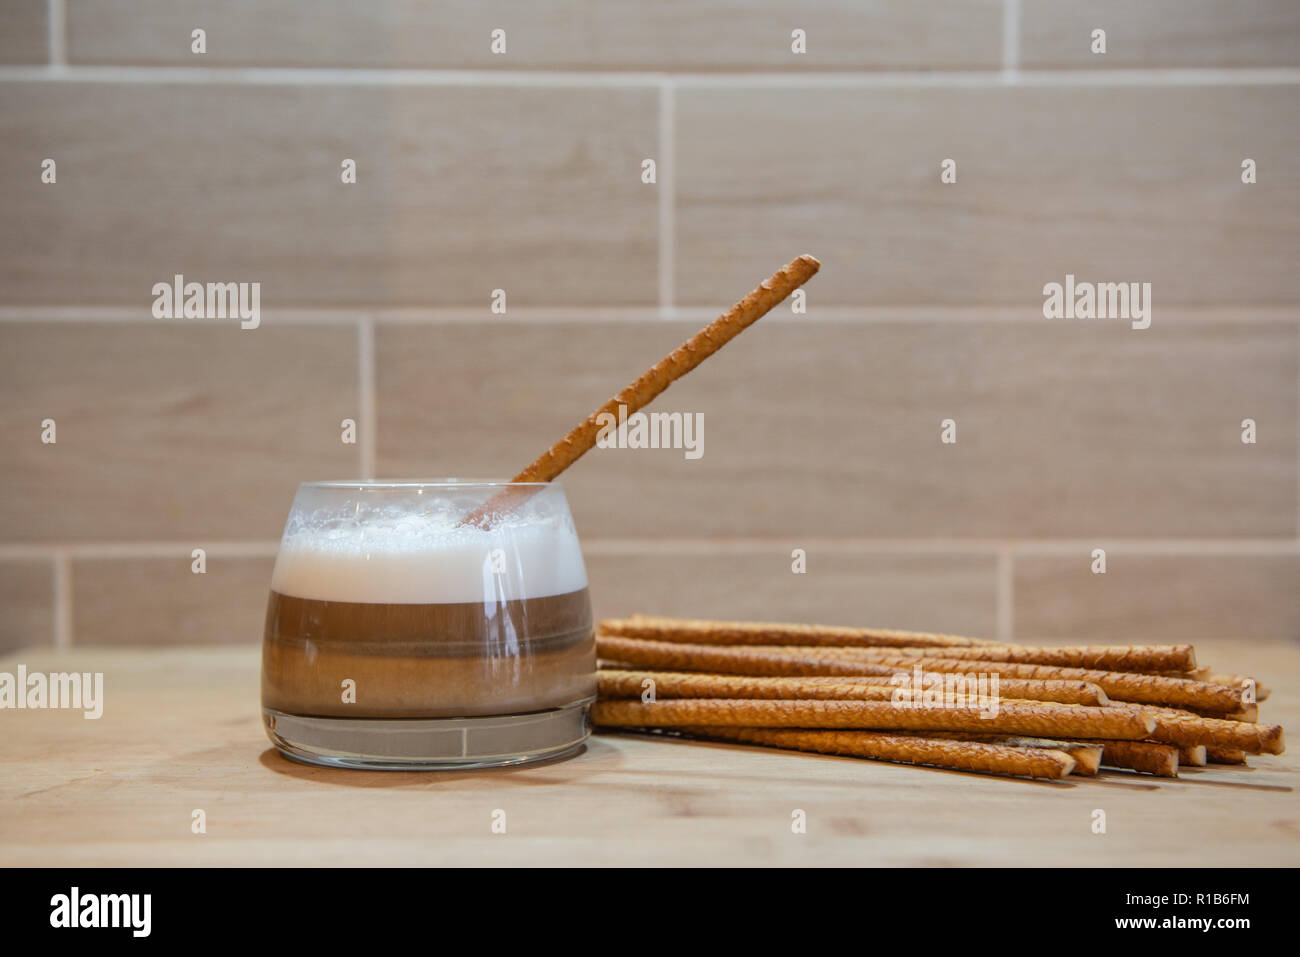 multilayer coffee or cappuccino in a glass cup with bread straw Stock Photo